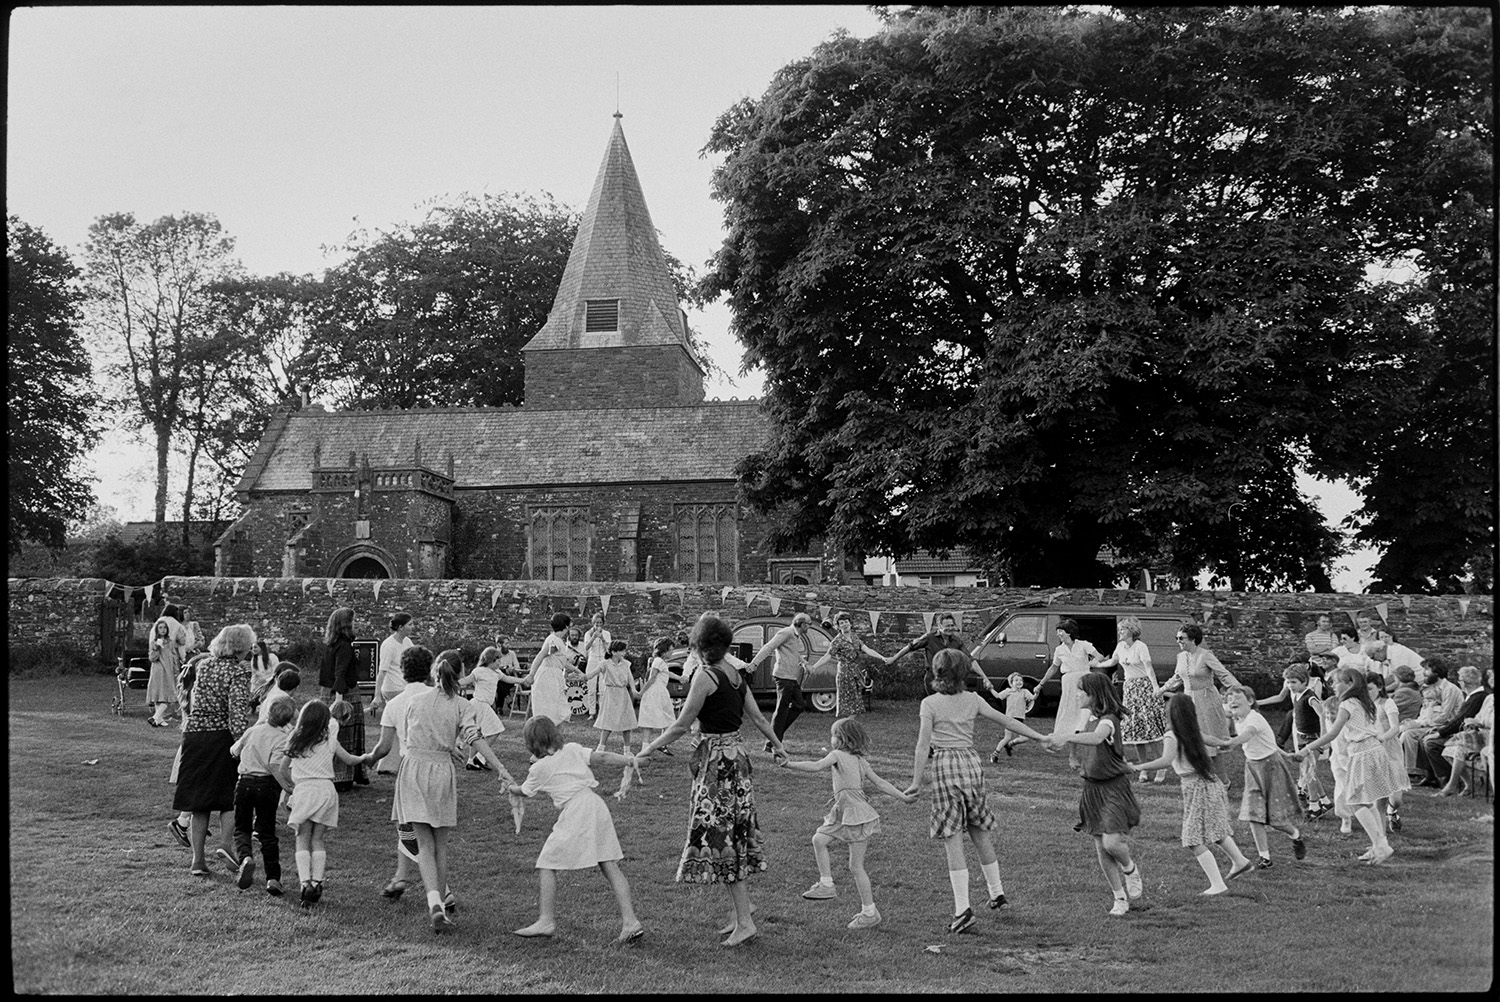 Children dancing on village green in front of church.
[Children, women and men holding hands in a circle and dancing on the Village Green at Beaford during the Beaford Revel. The Church of St George and All Saints is visible in the background, and a string of bunting is decorating the wall around the church.]